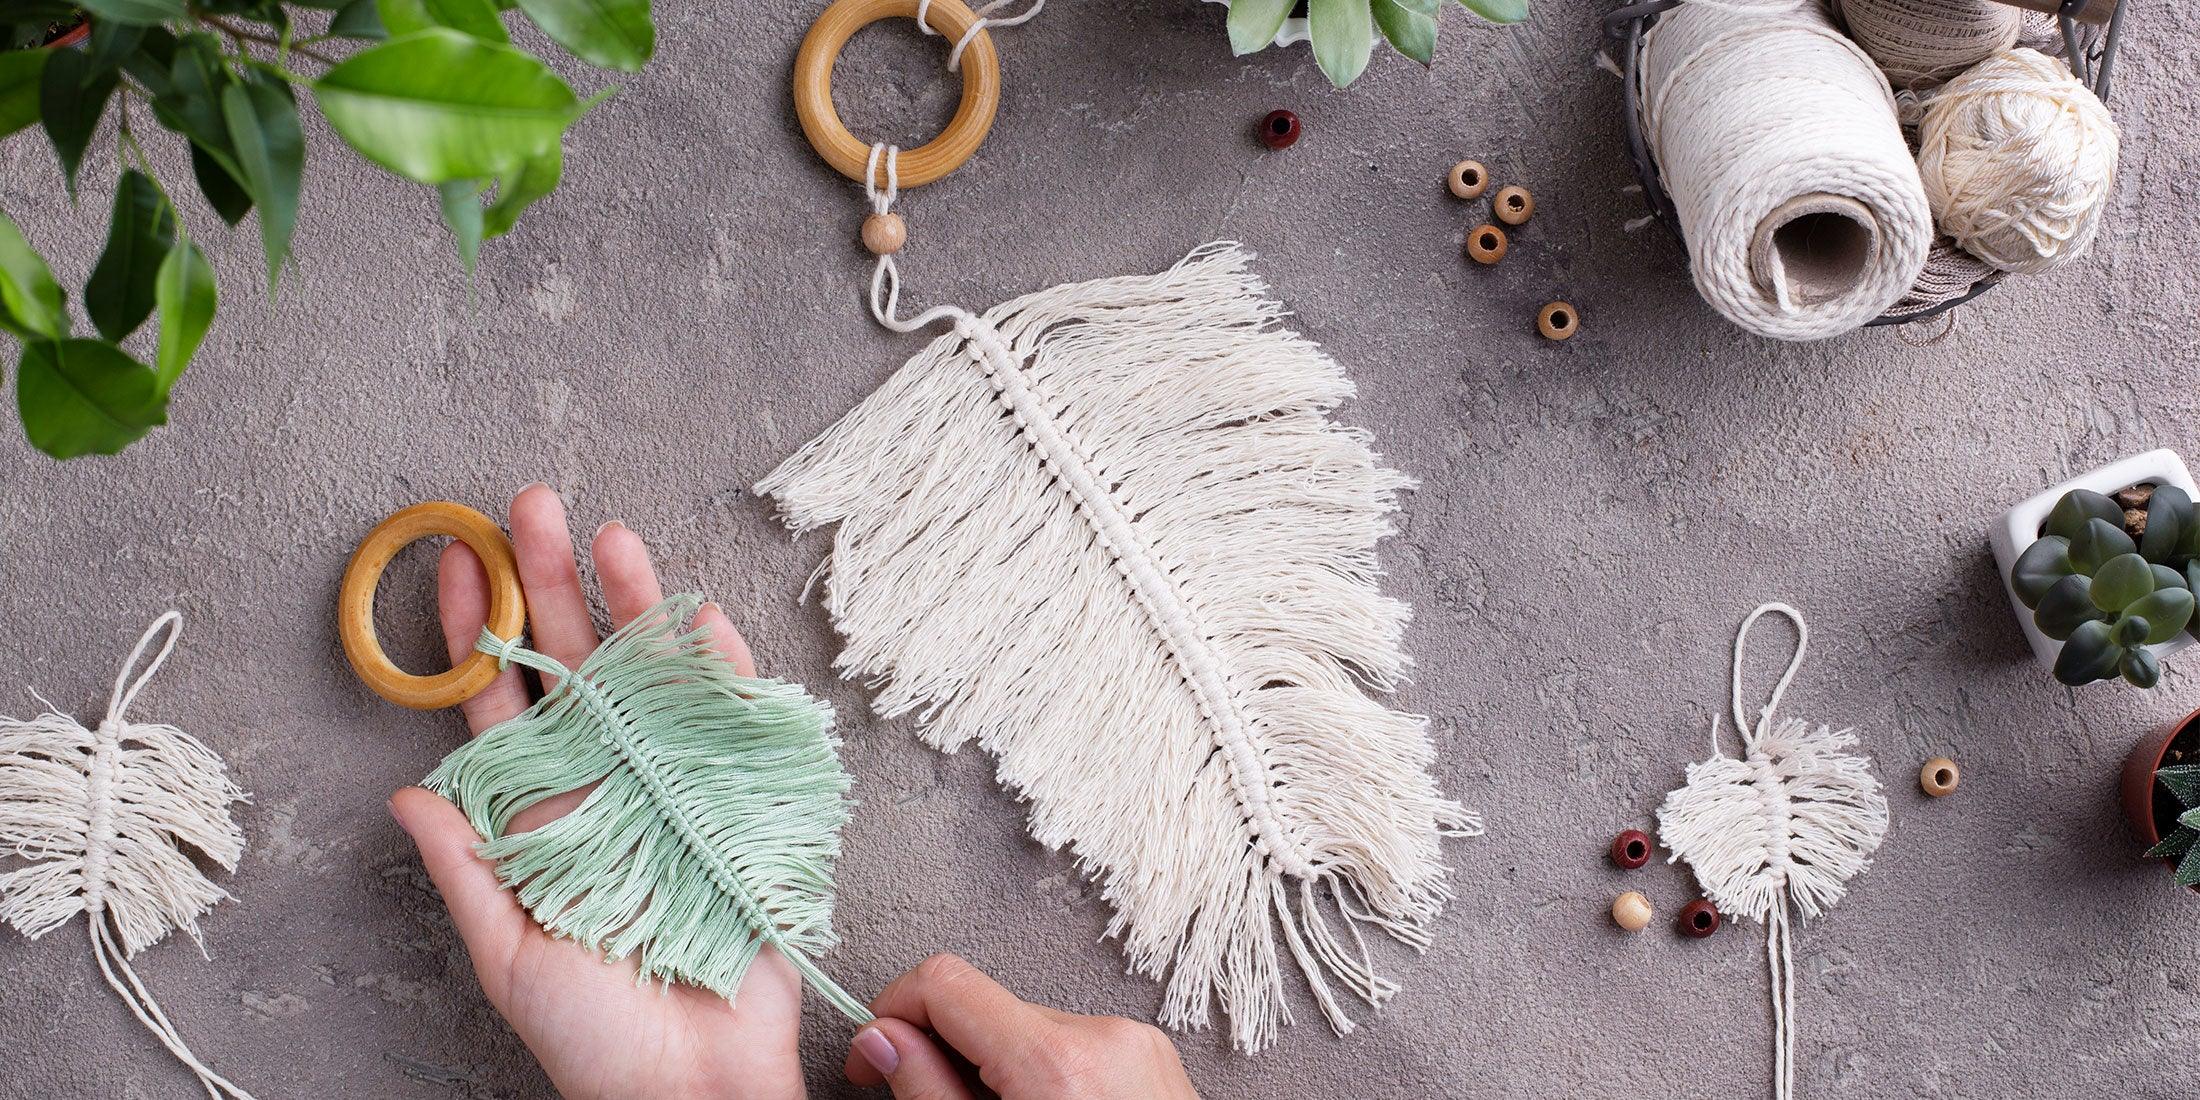 How to Make DIY Tassel Lace Keychain for All Your Friend - BlingBlingYarn